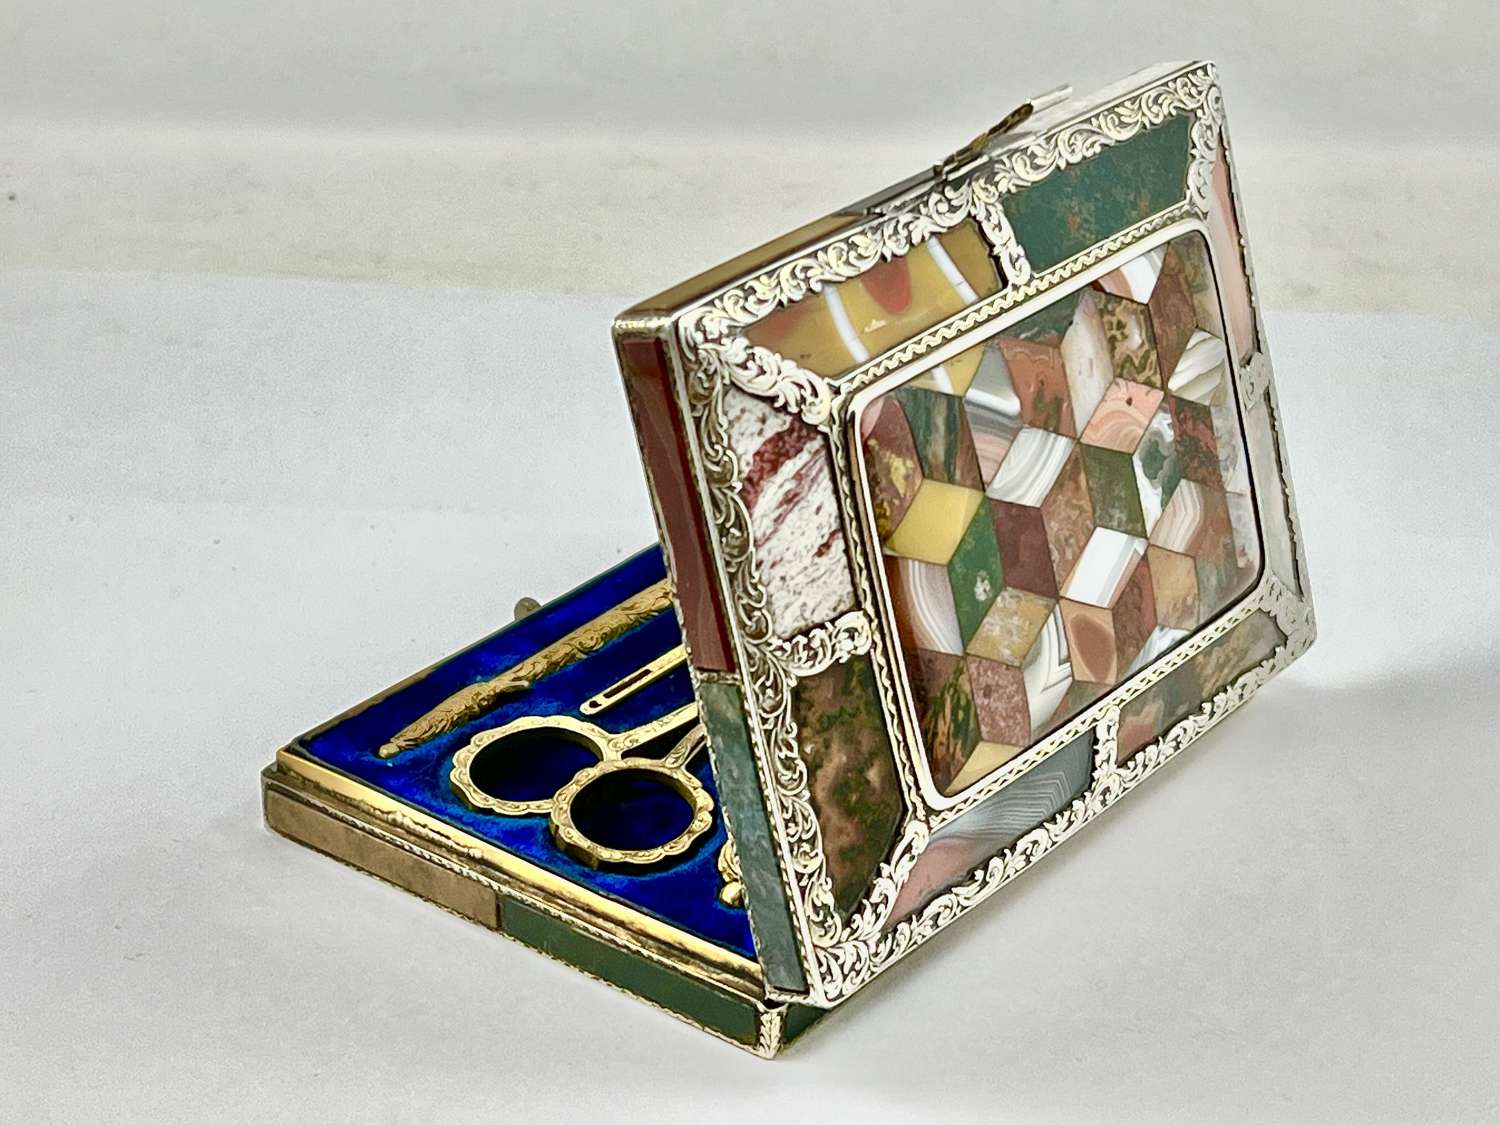 Scottish Victorian silver and agate sewing case, c.1860